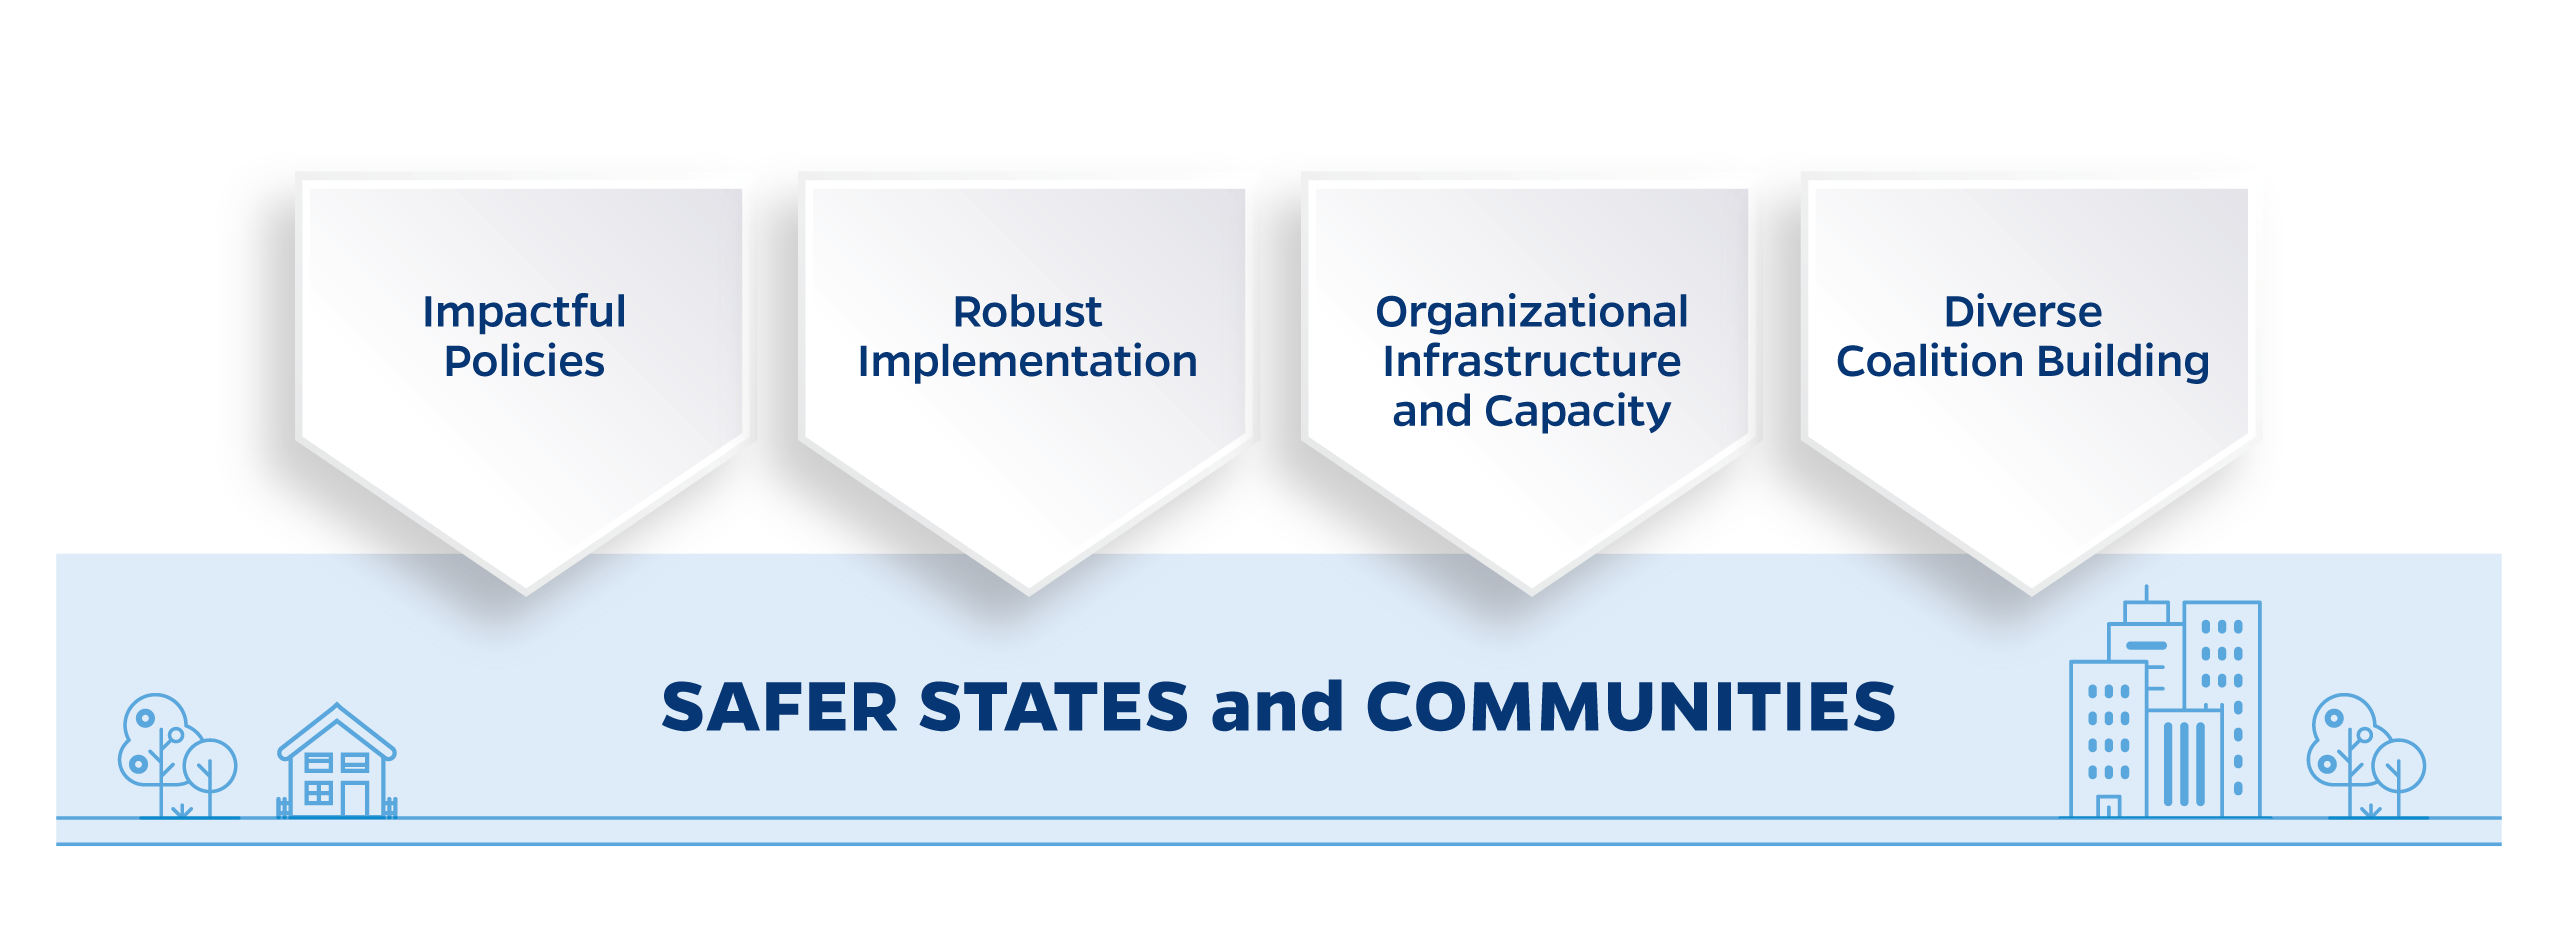 Safer states and communities: Impactful policies, robust implementation, organizational infrastructure and capacity, diverse coalition building